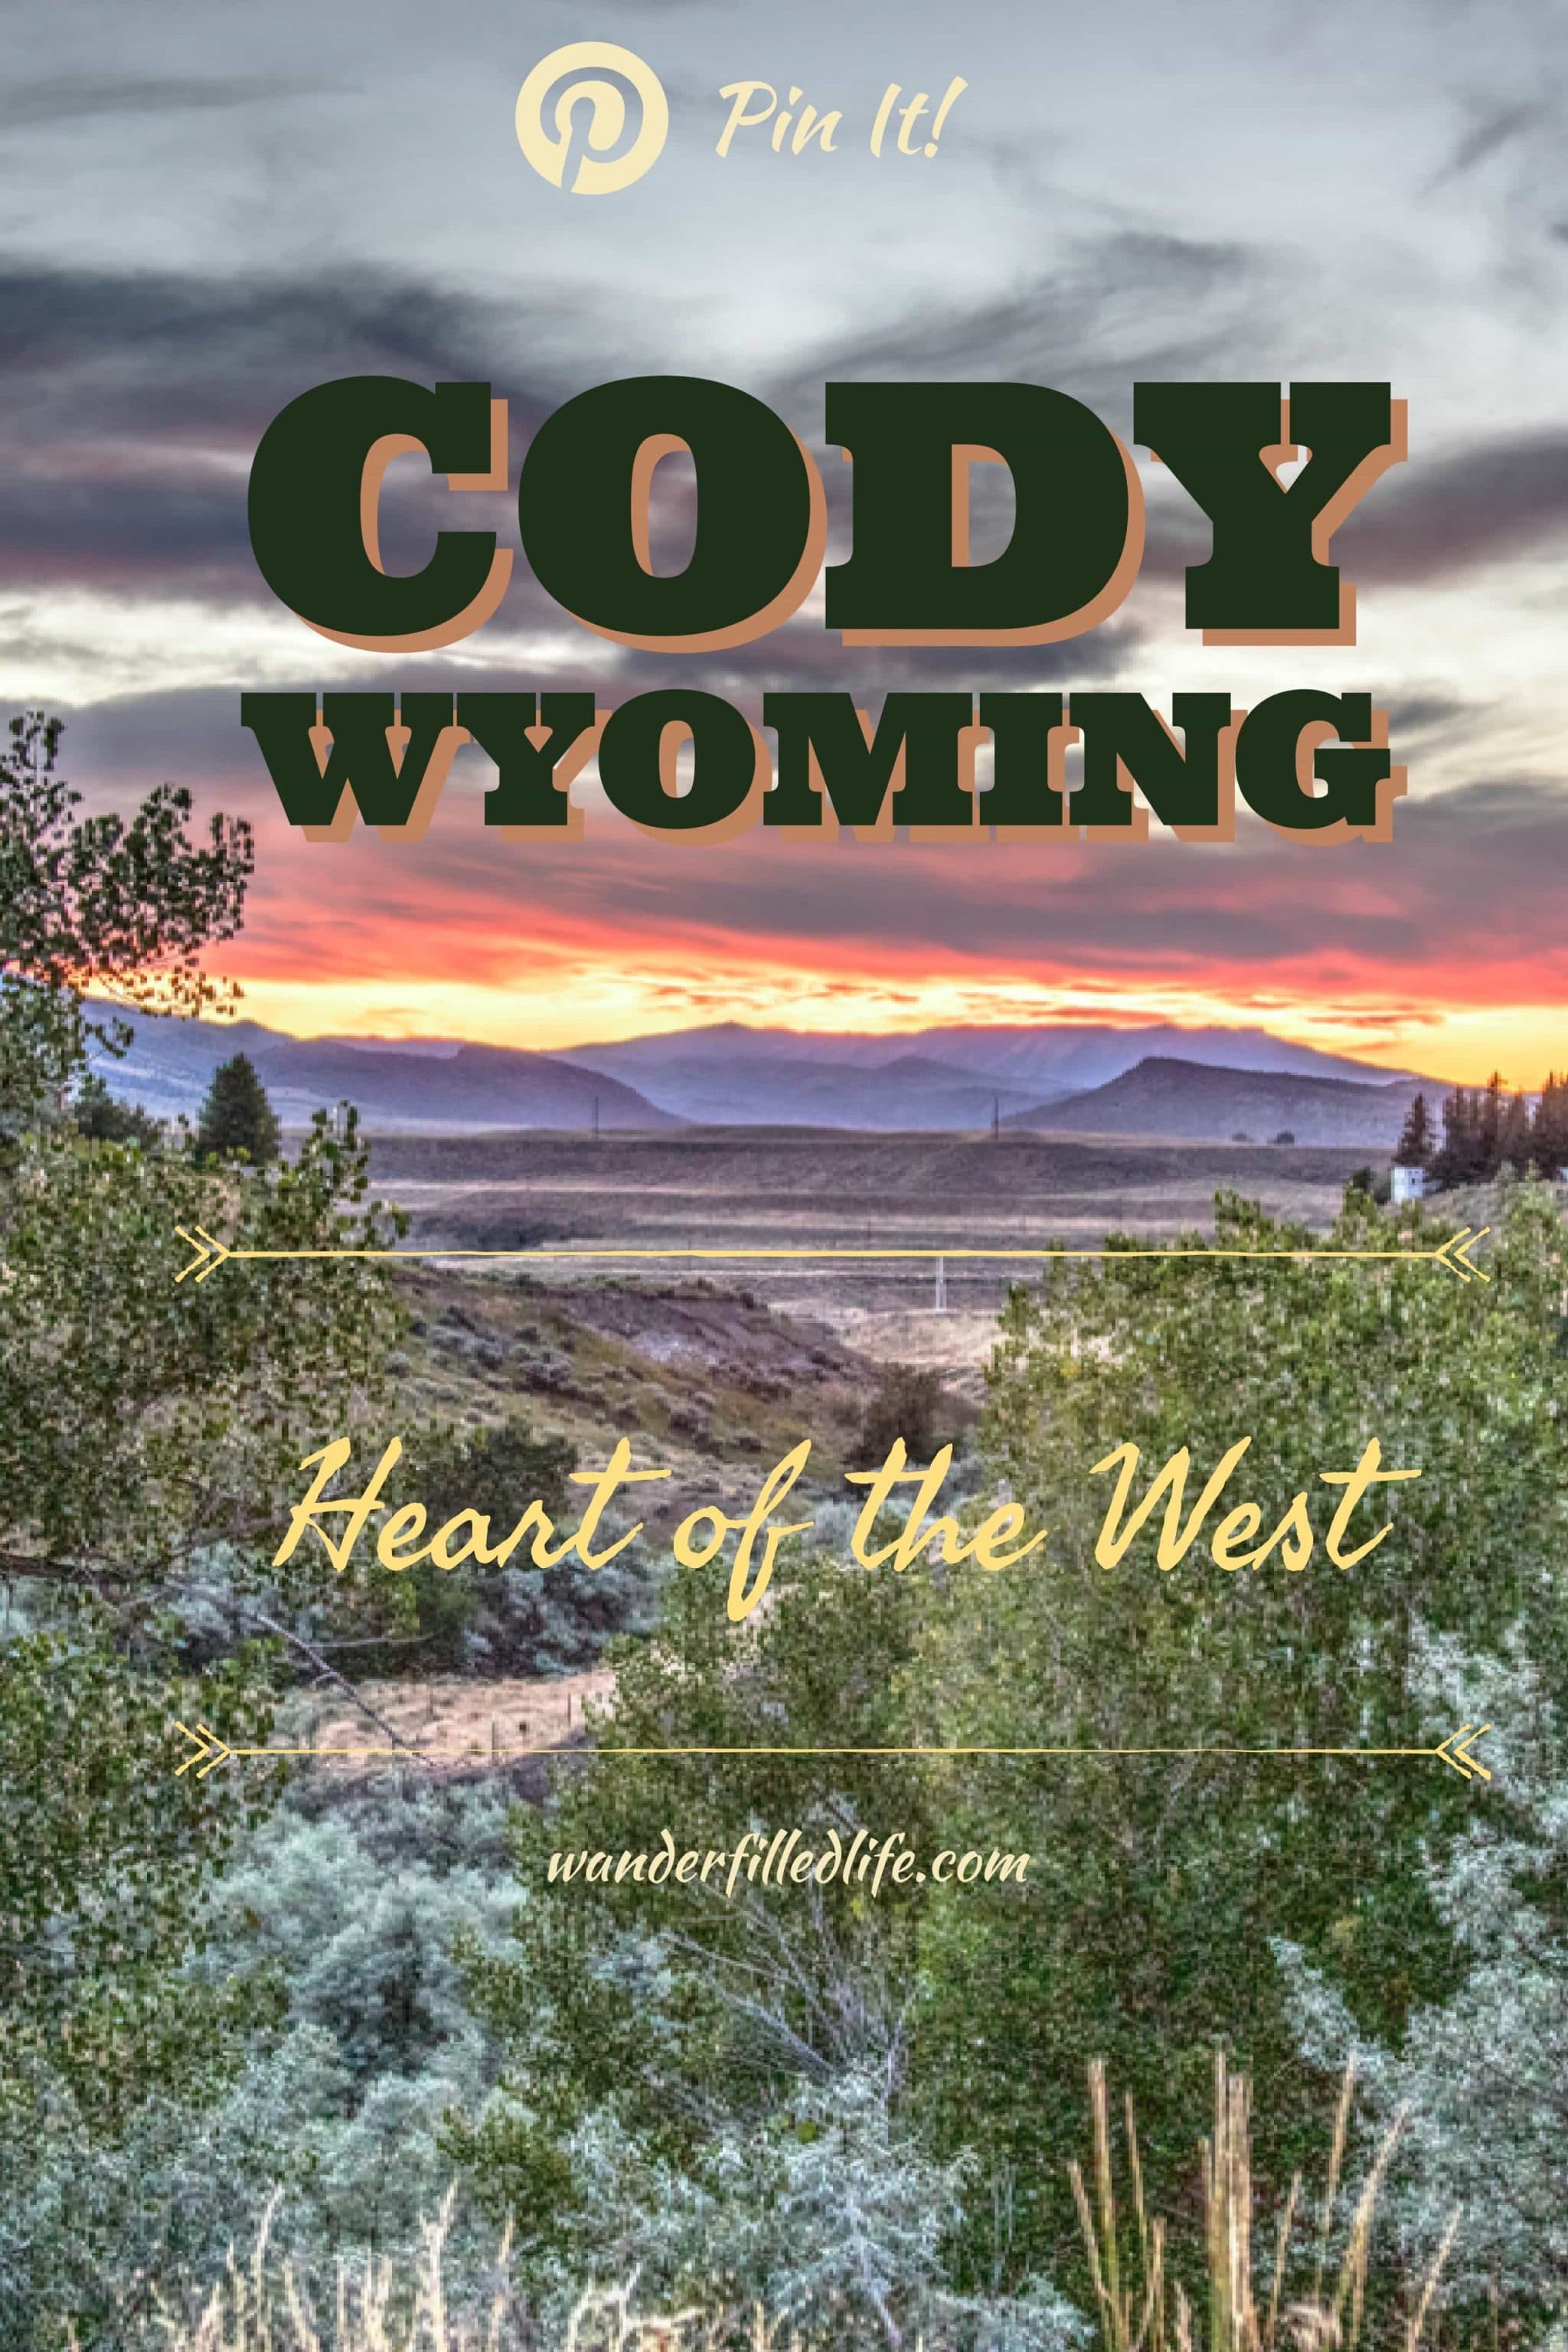 Cody, Wyoming might seem like just a convenient stop on the way to Yellowstone, but there is so much to see and love in this town, we can't help going back.